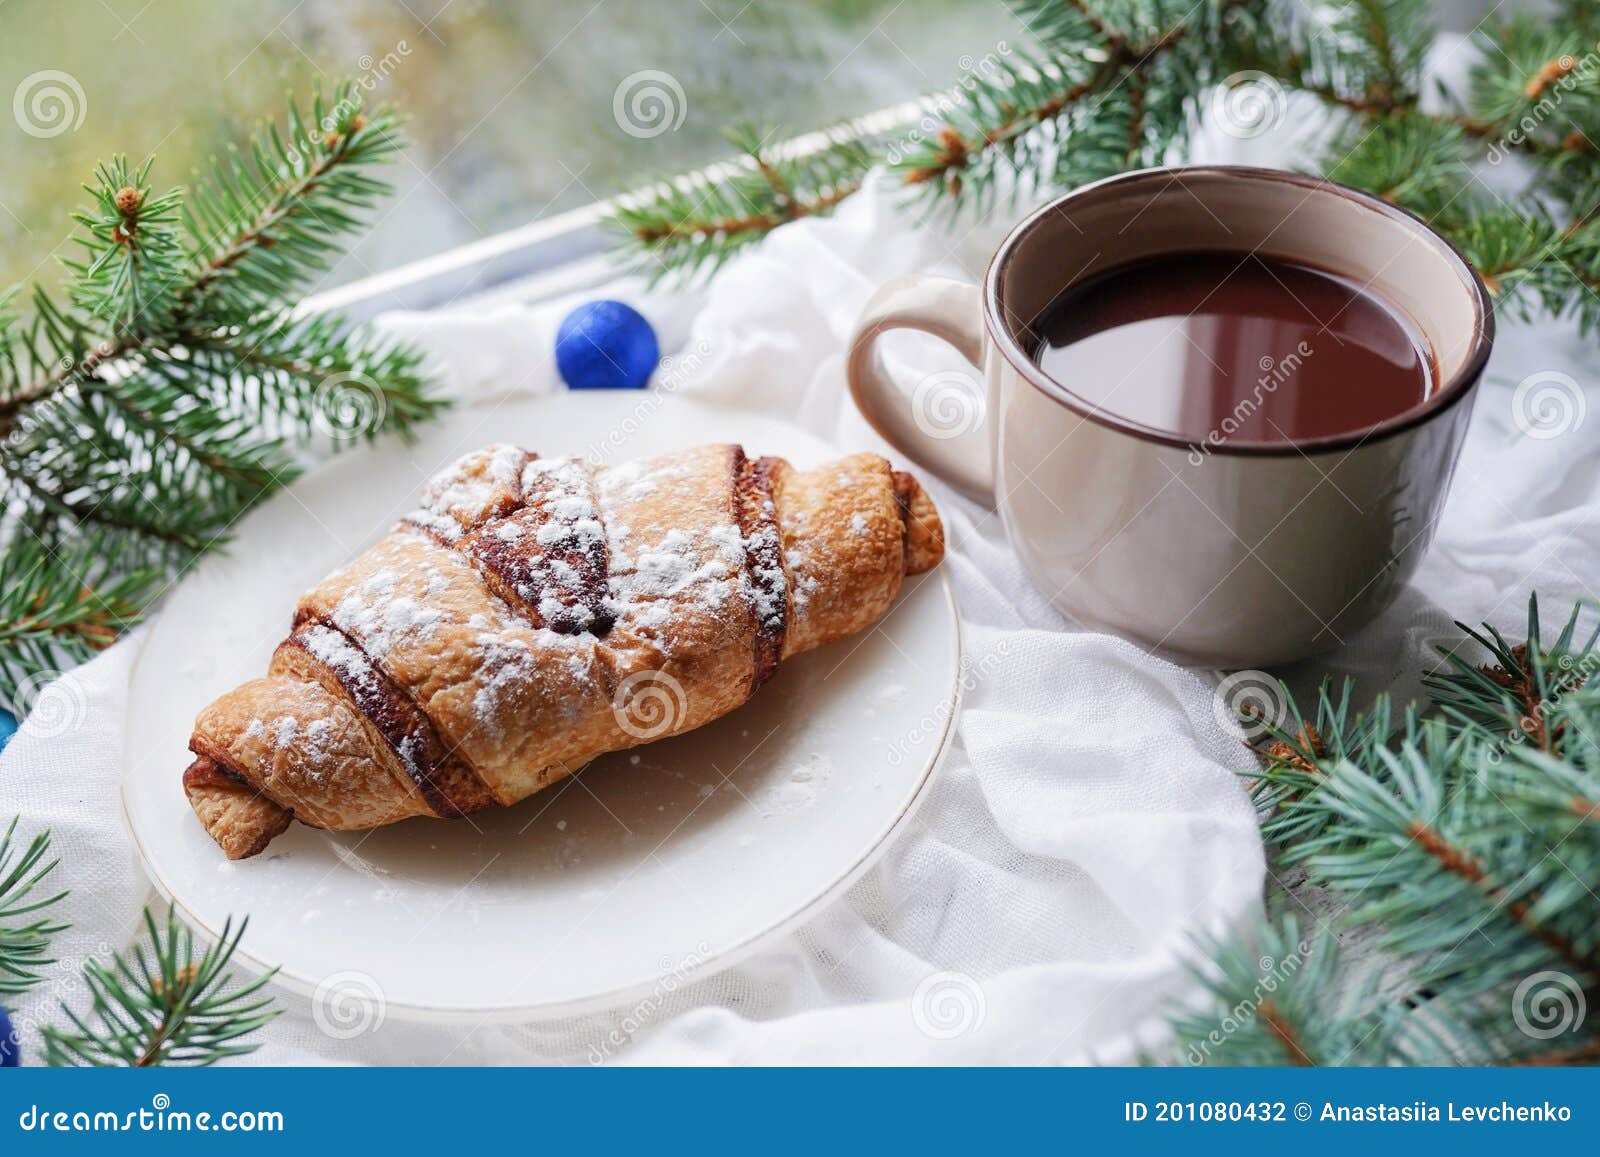 Outdoor Still Life Coffee Pot Cup Croissants Winter Make Coffee